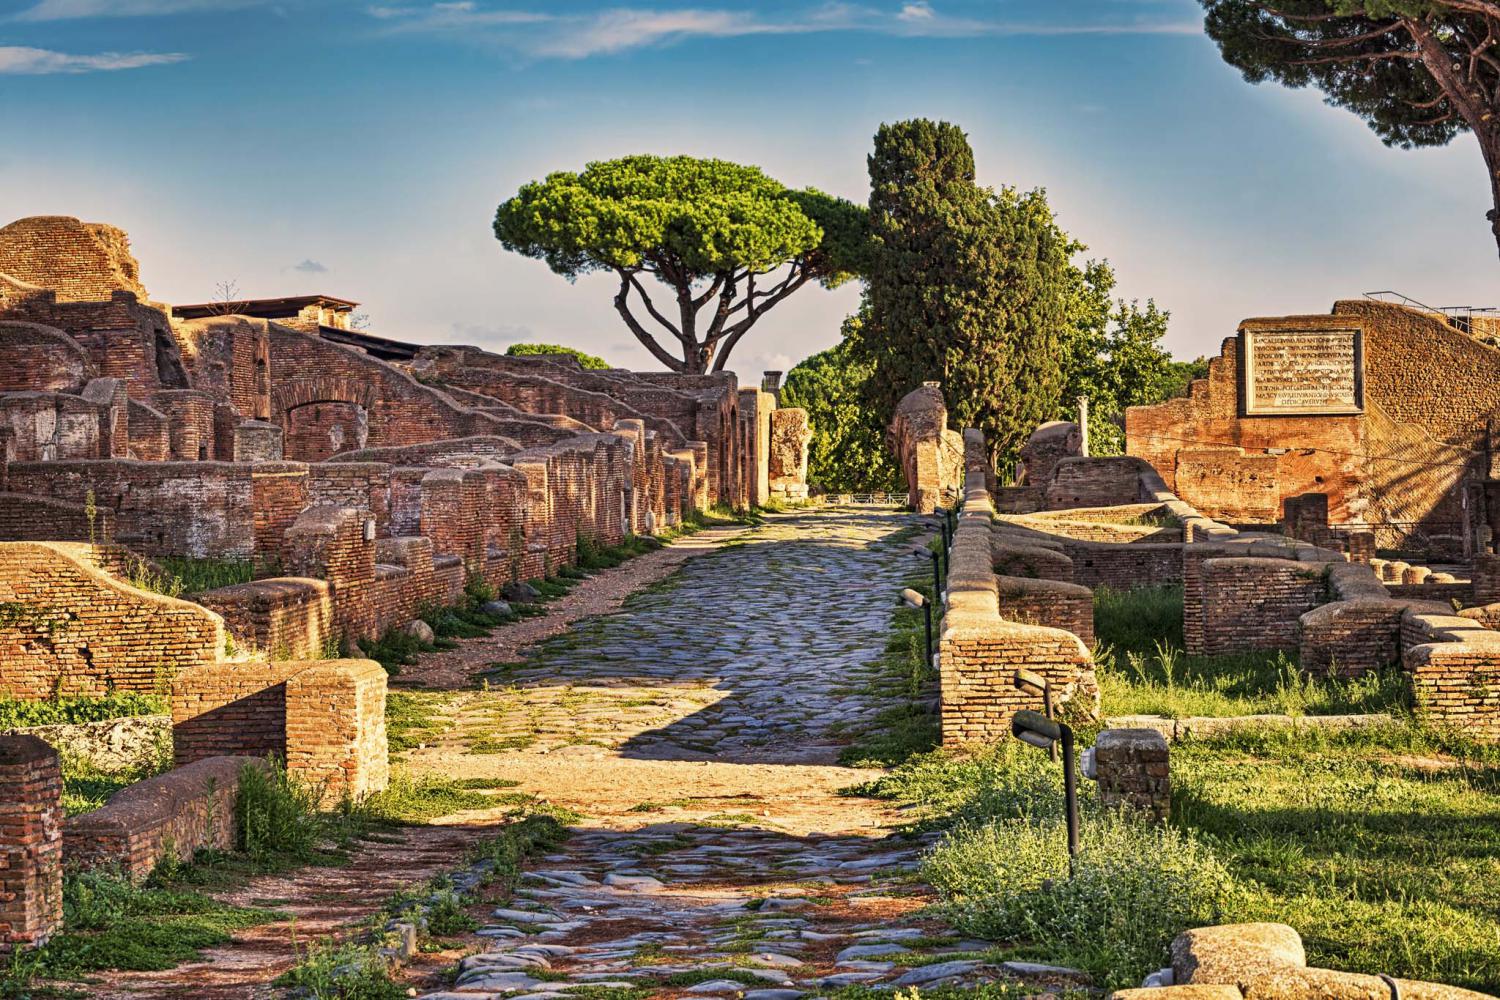  An ancient Roman street with a stone path and the ruins of buildings on either side, including a wooden funnel-shaped object.